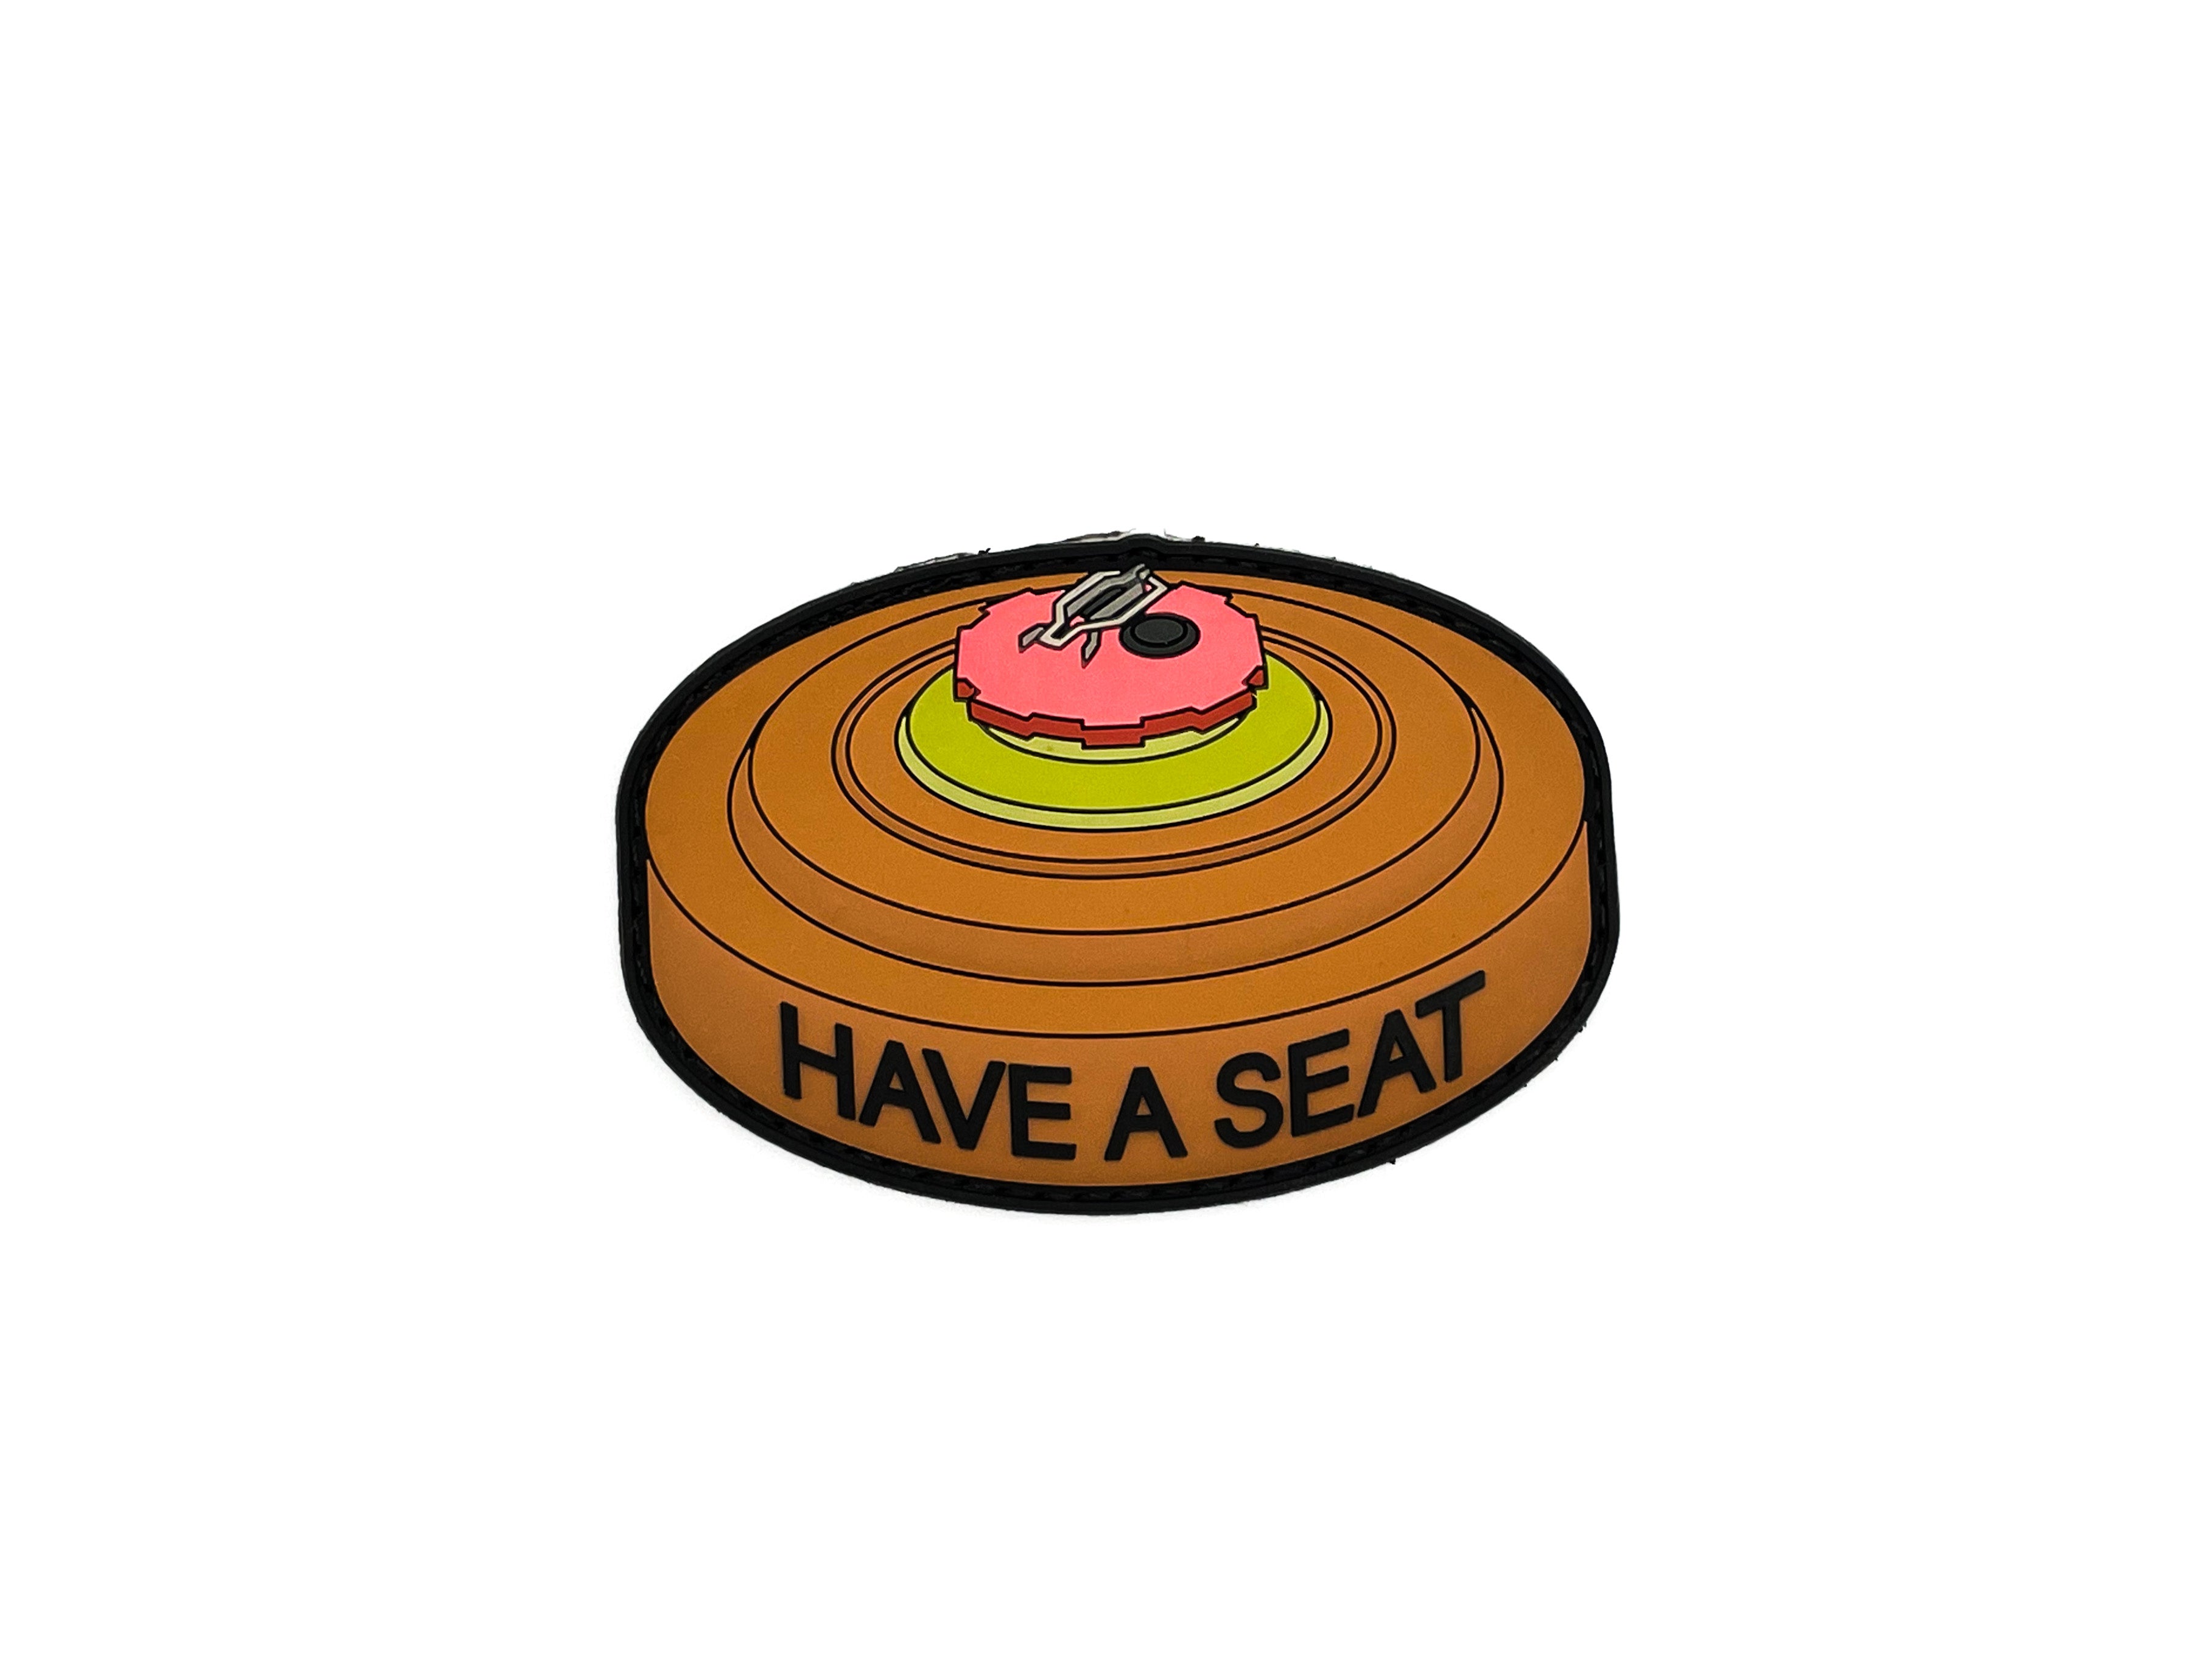 Have a seat